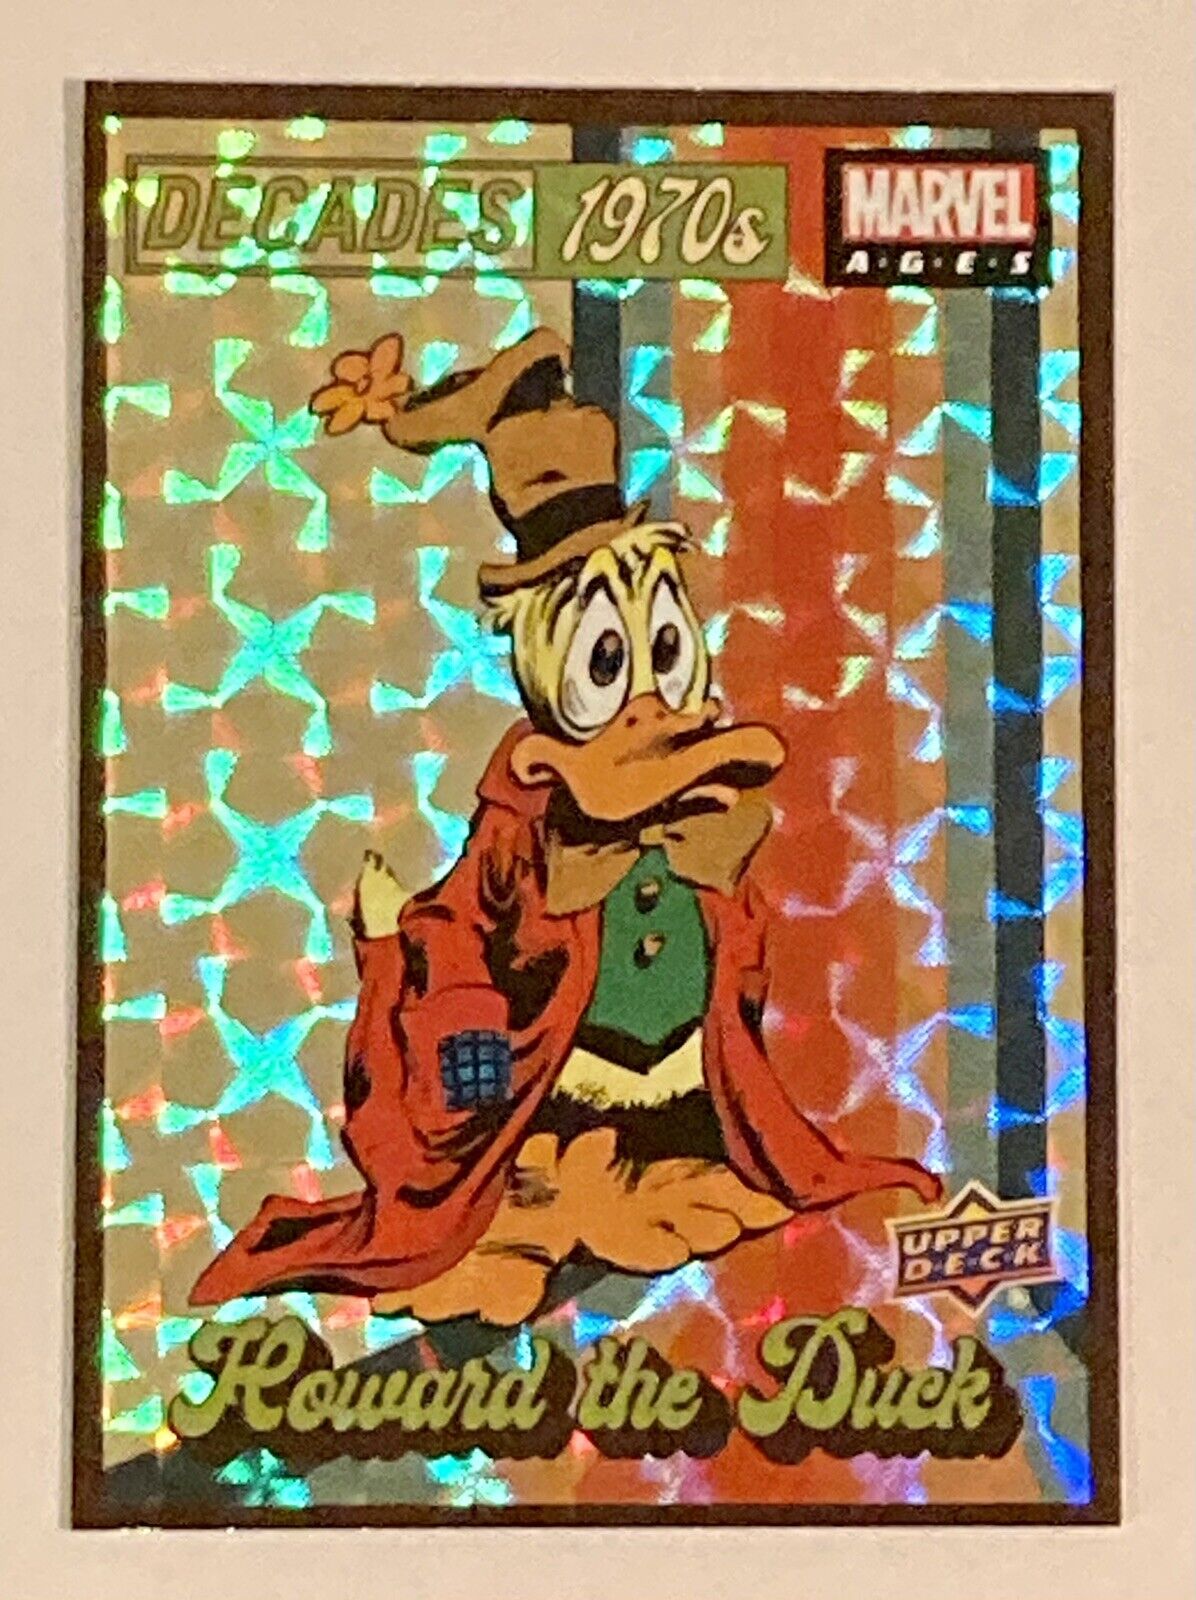 Upper Deck Marvel Ages Decades 1970’s Howard the Duck Card